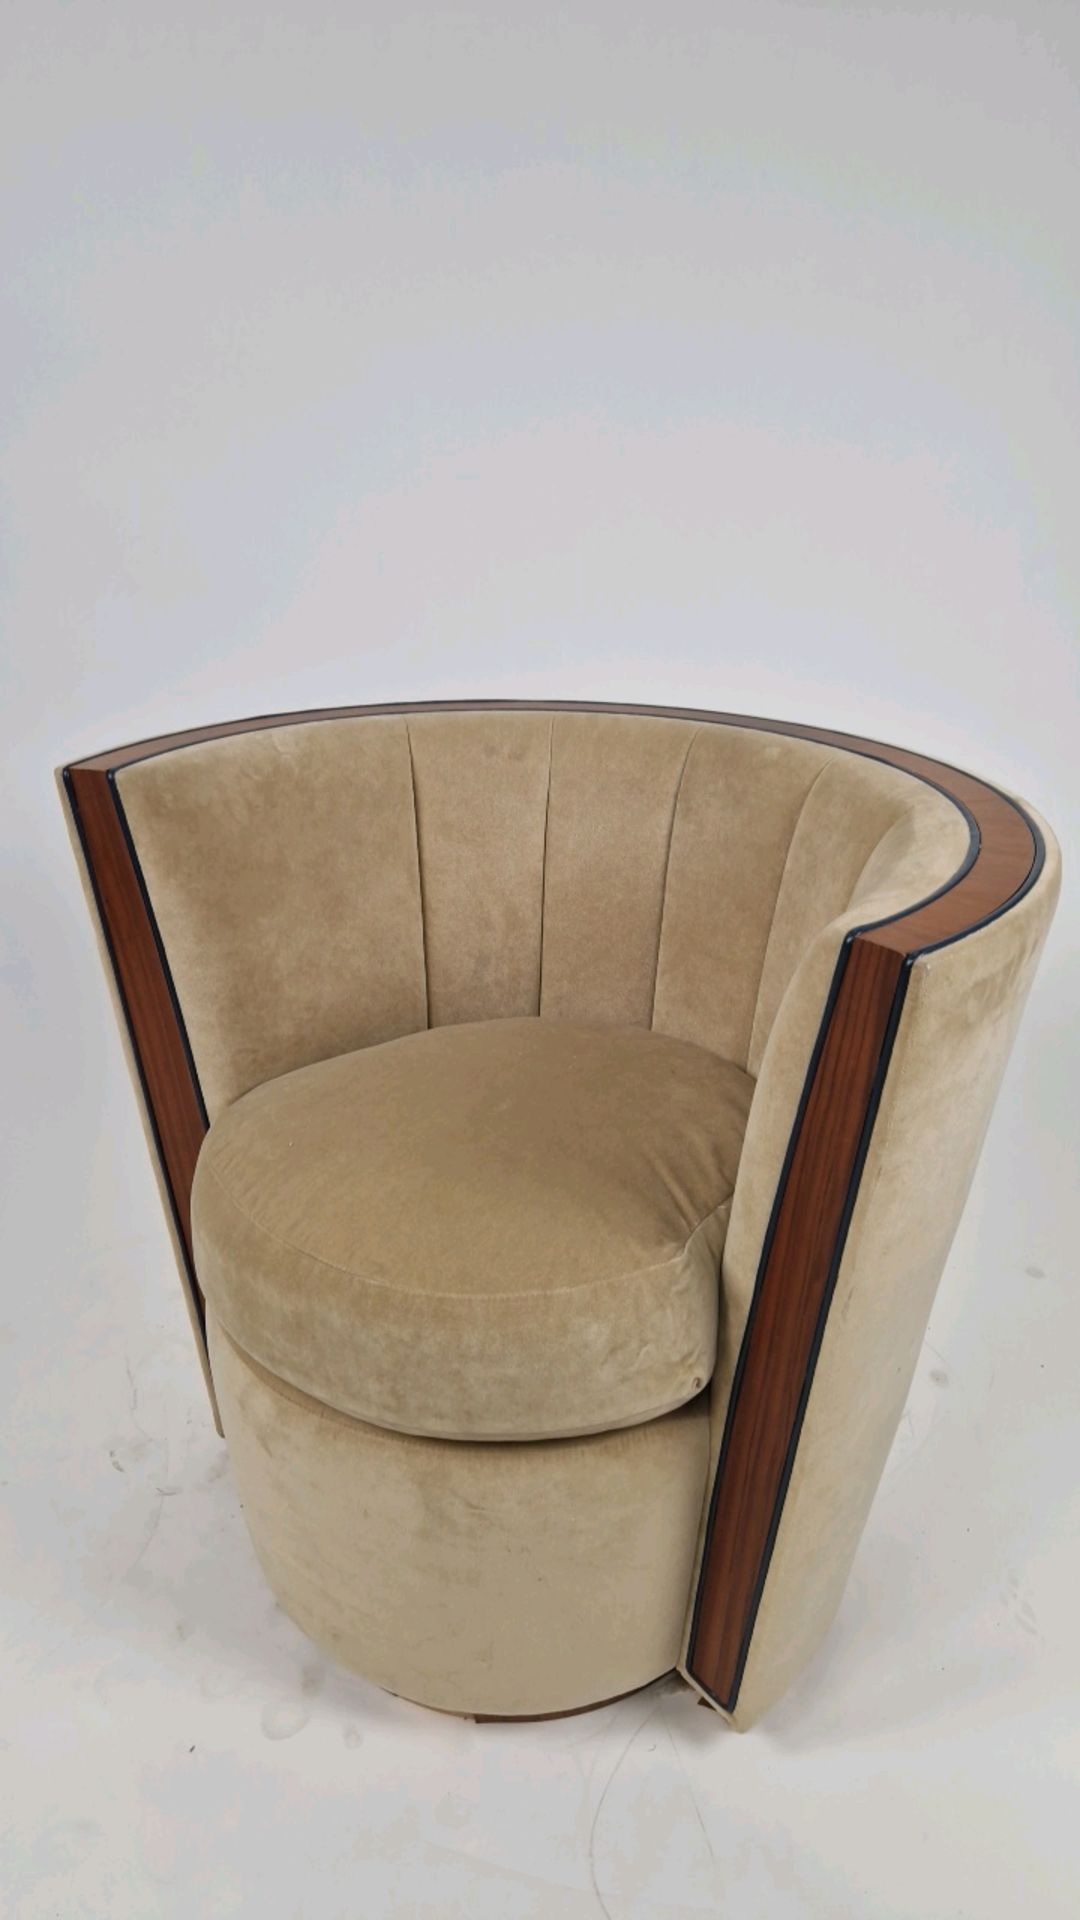 Bespoke David Linley Tub Chair Made for Claridge's Suites - Image 6 of 6